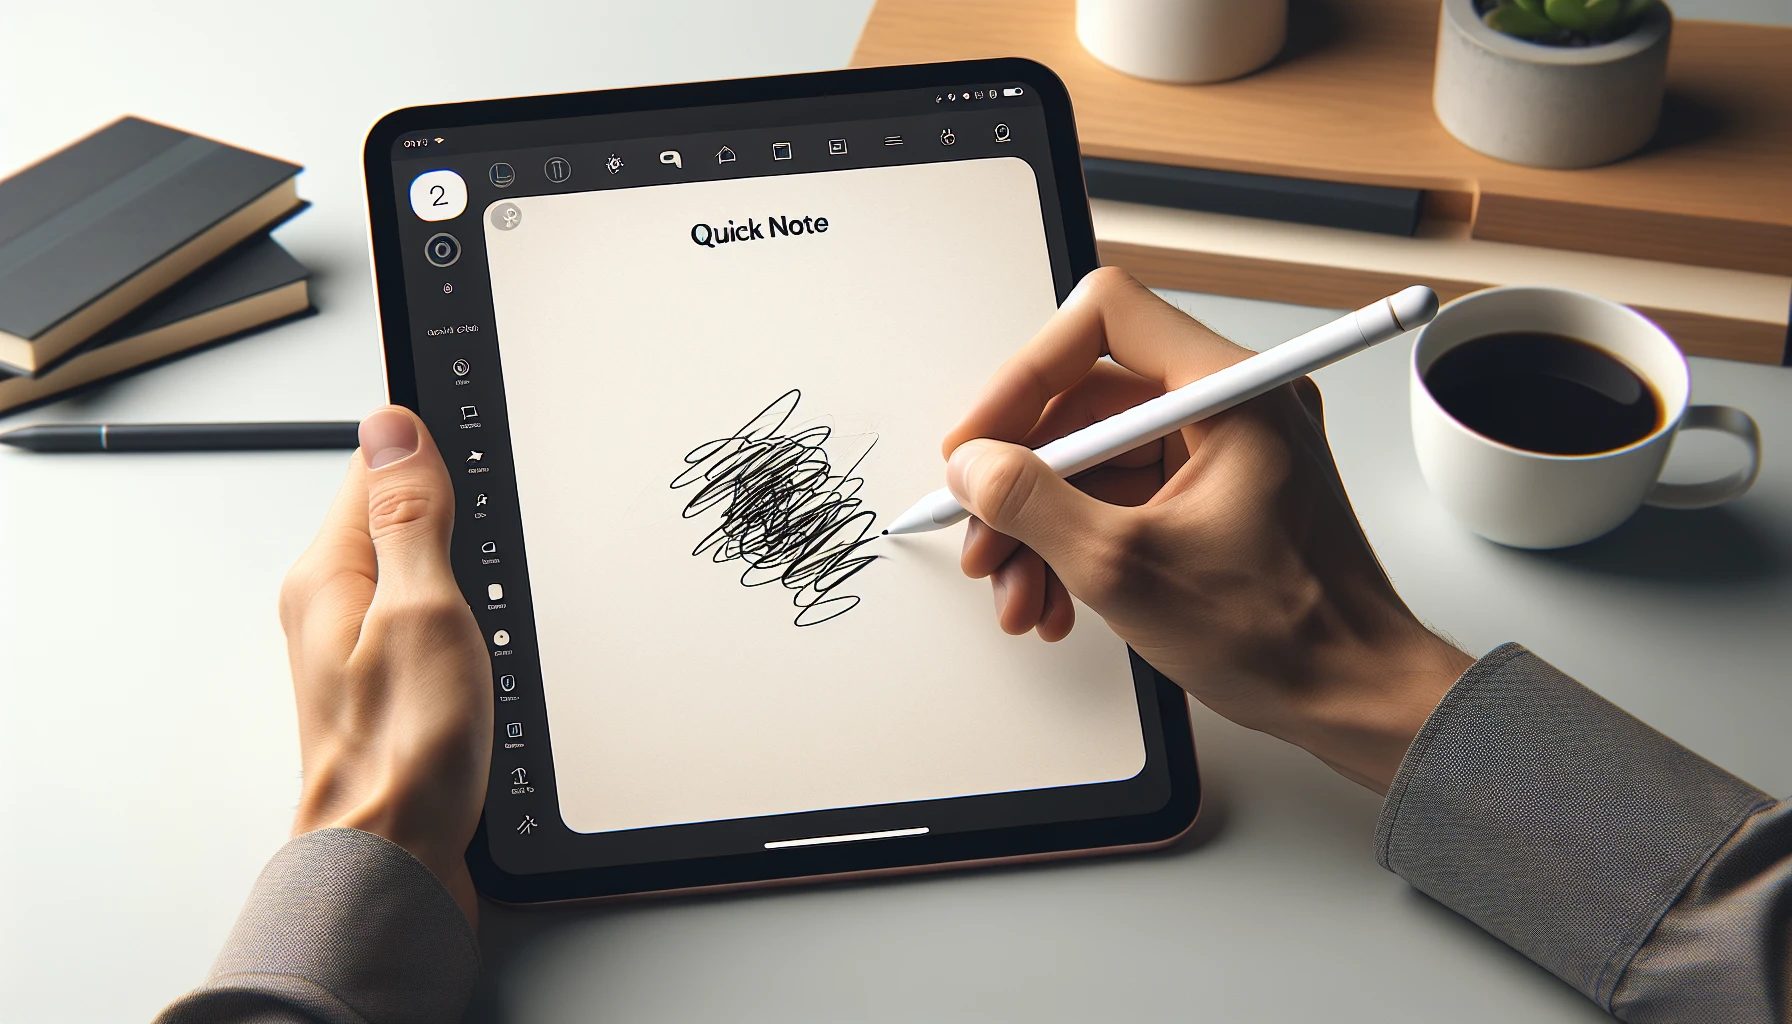 Using Quick Note feature with Apple Pencil